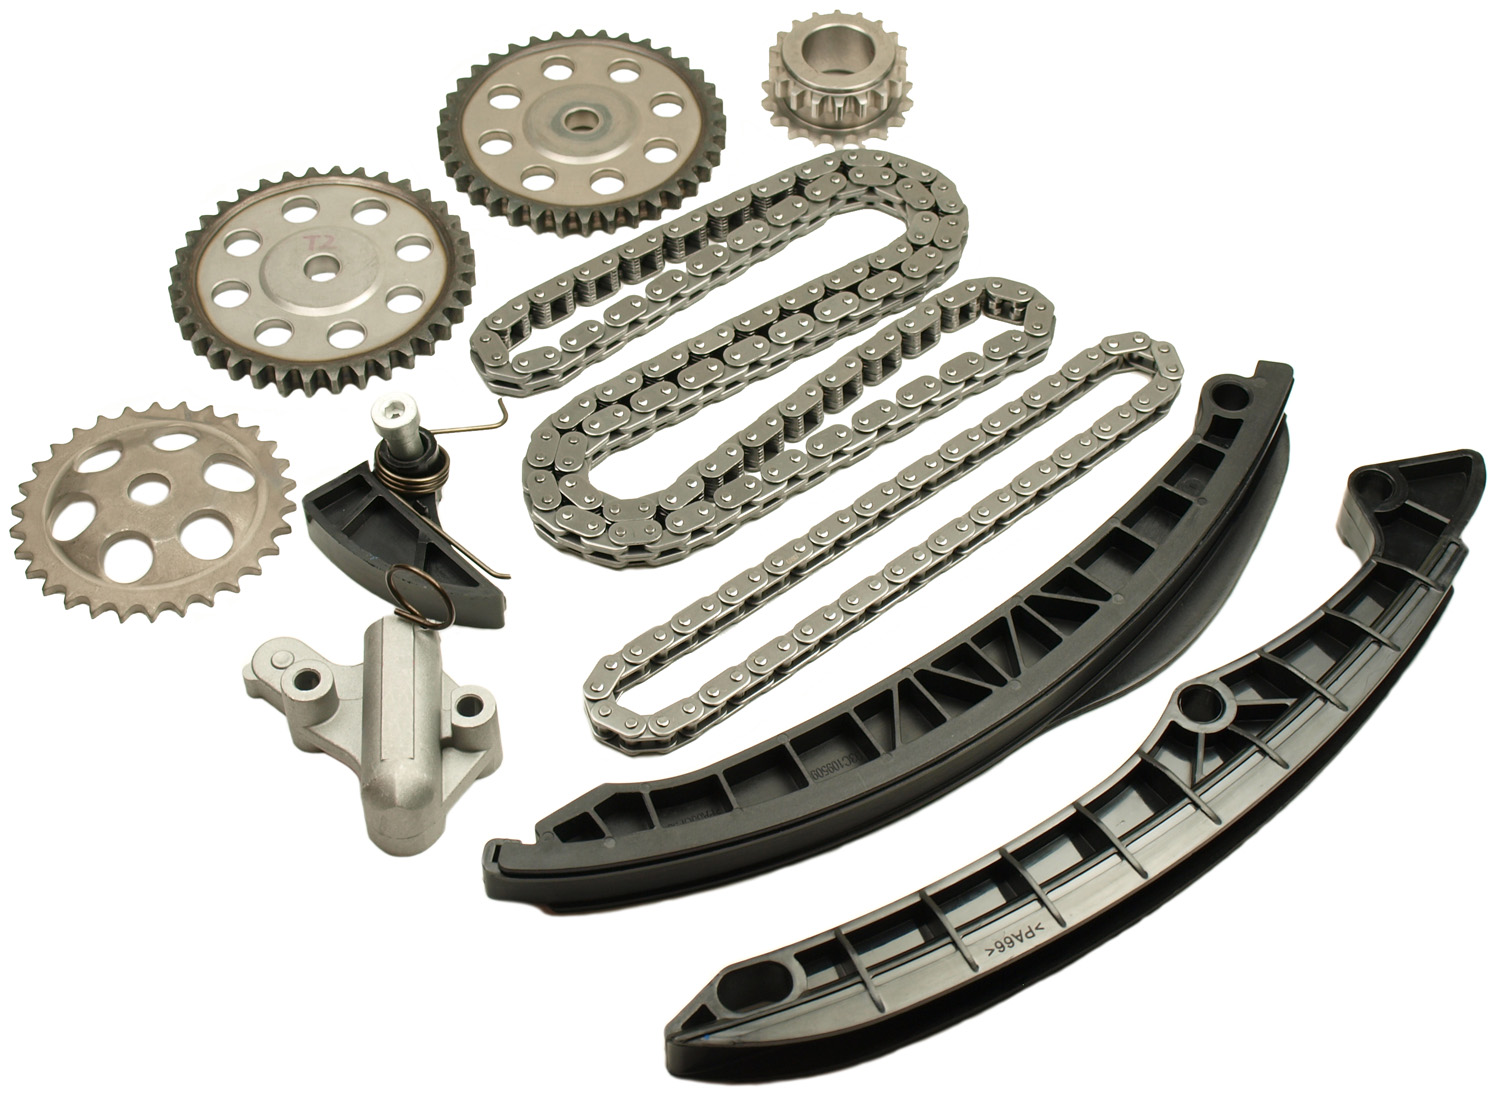 Leveraging its expertise in timing drive systems, Cloyes utilizes the latest in design and technology to offer complete timing chain kits